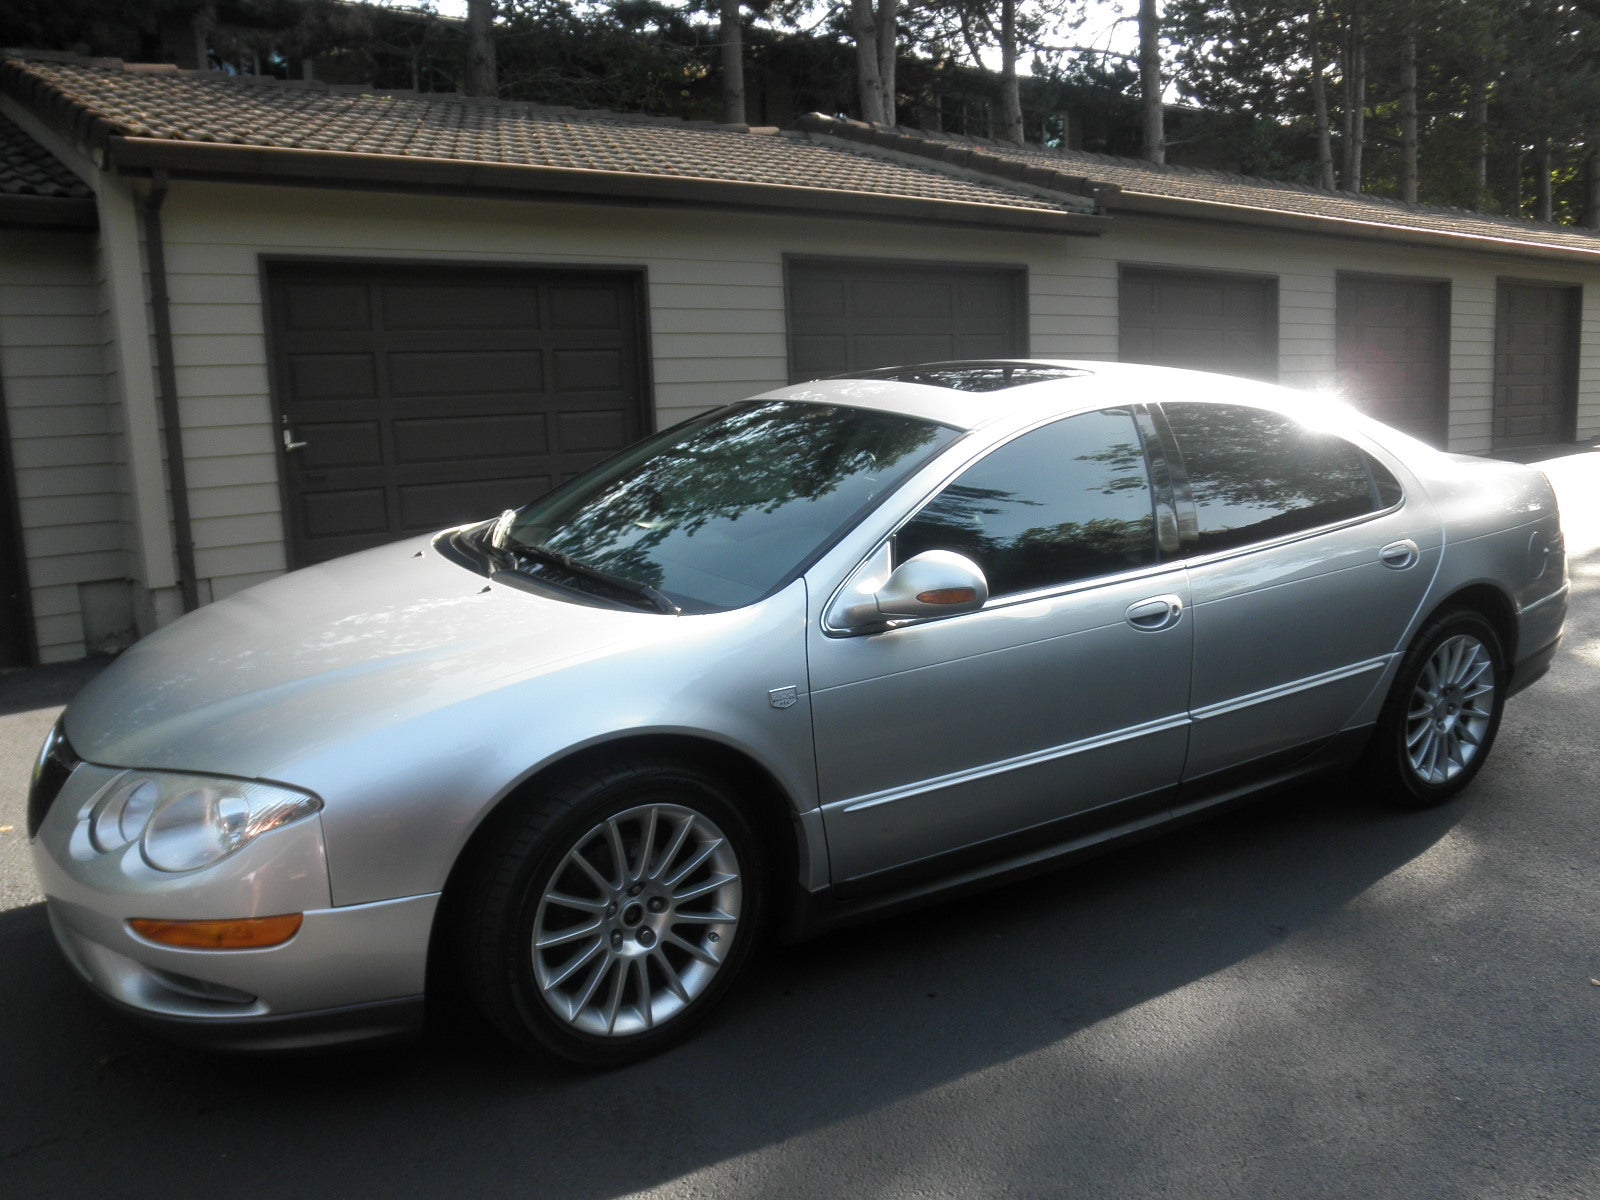 2002 Chrysler 300M - Pictures - 2002 Chrysler 300M Special pic ...